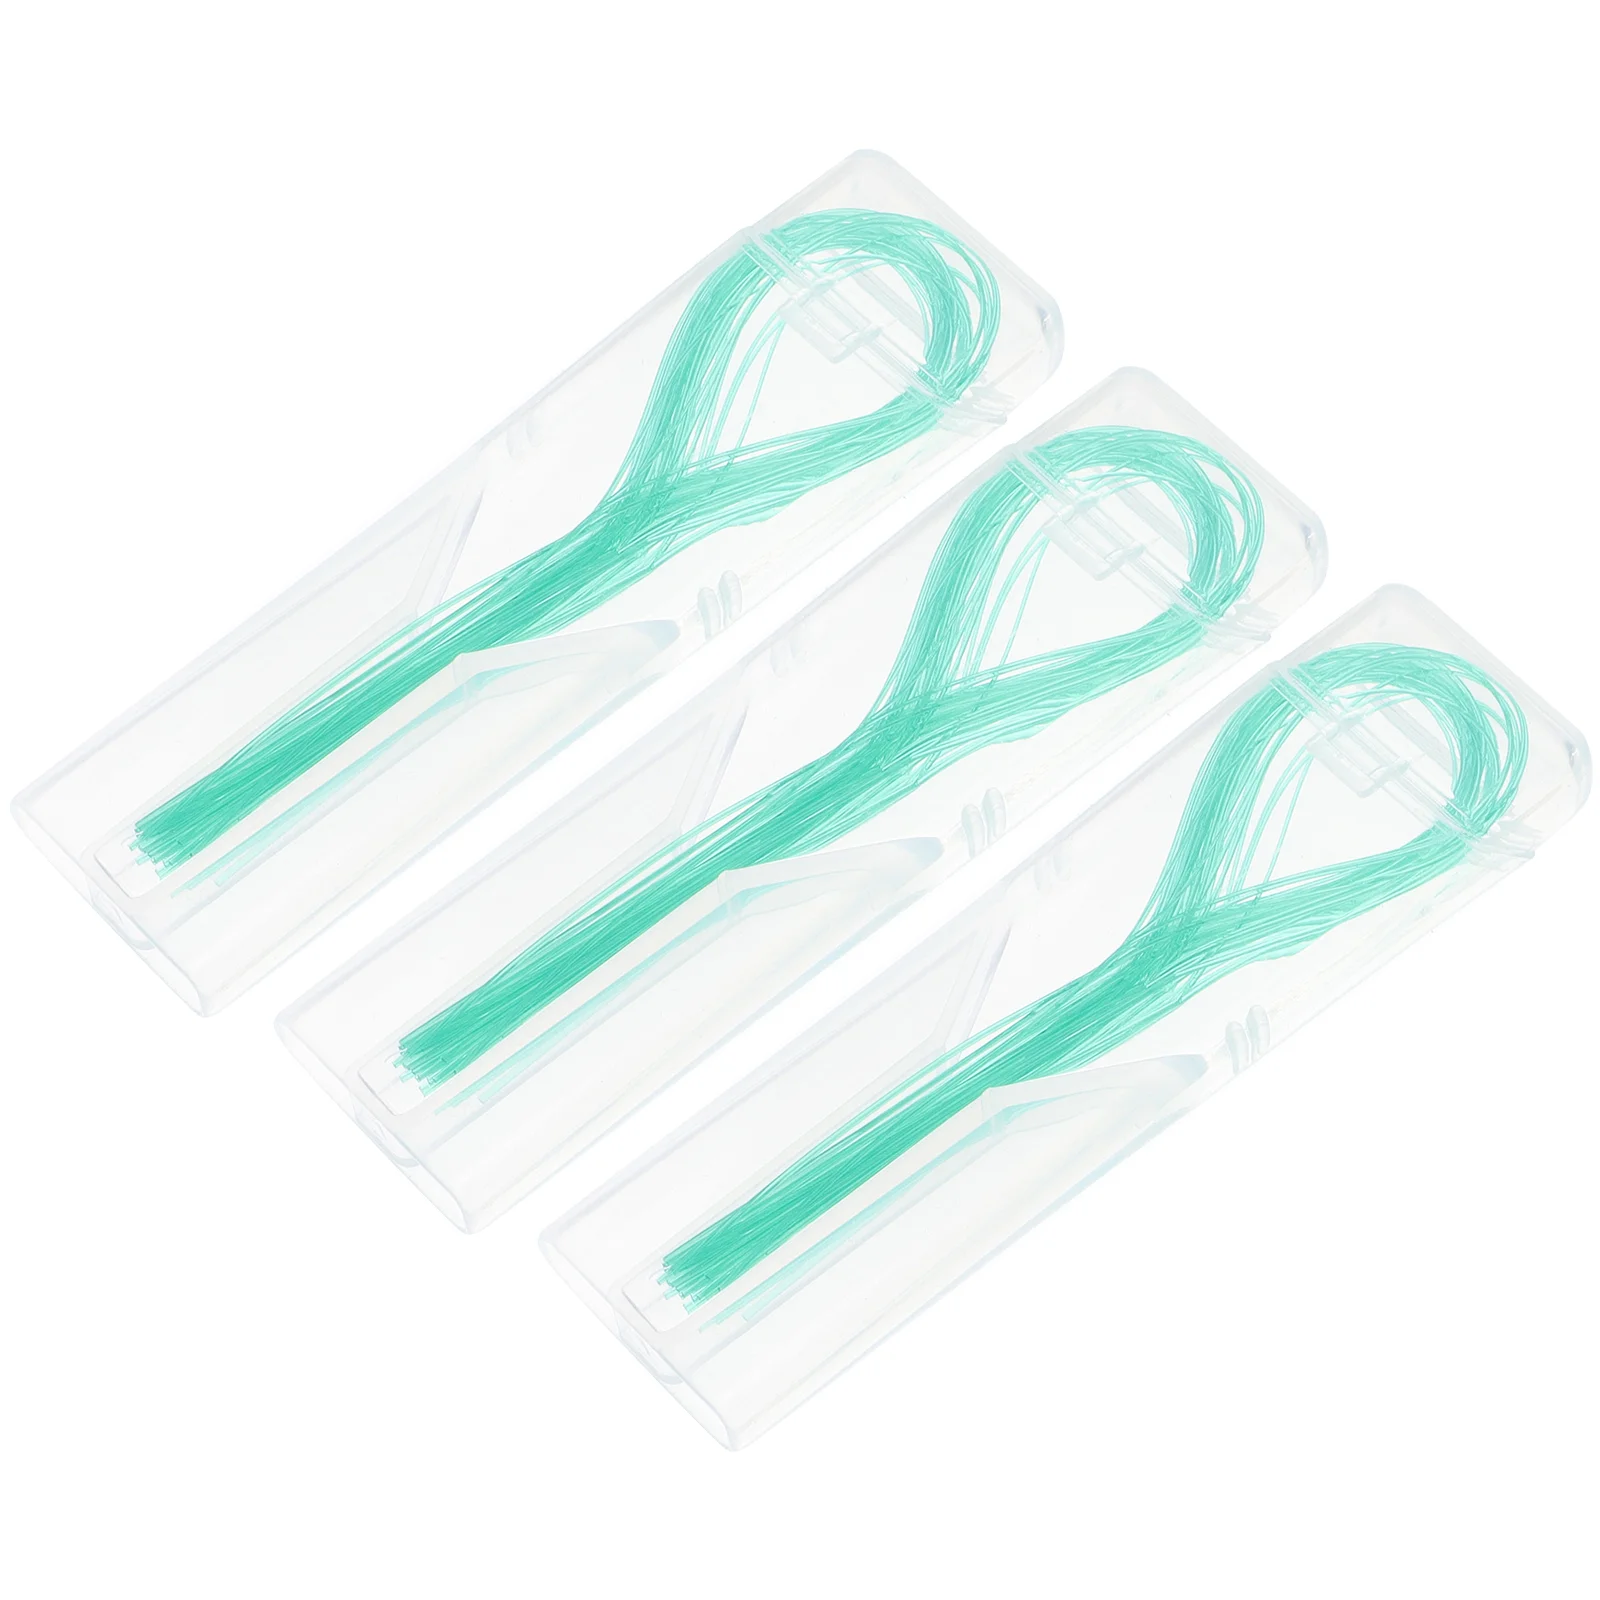 

105 Pcs Dental Floss Threading Threaders Braces Teeth Cleaning Toys Professional Flossers Disposable